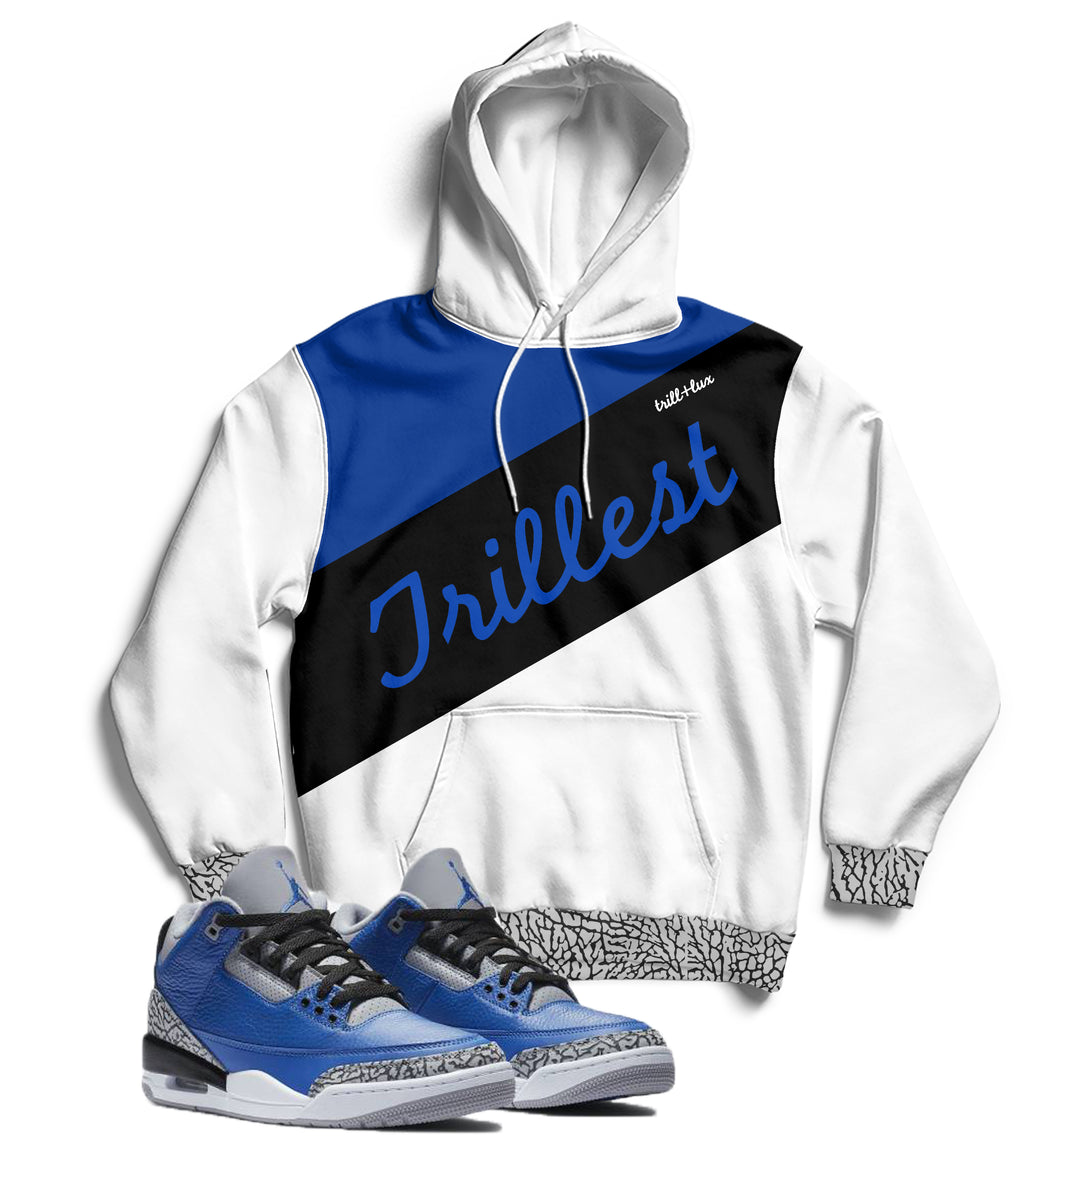 Trill and Lux | Retro Jordan 3 Blue Cement Inspired Hoodie